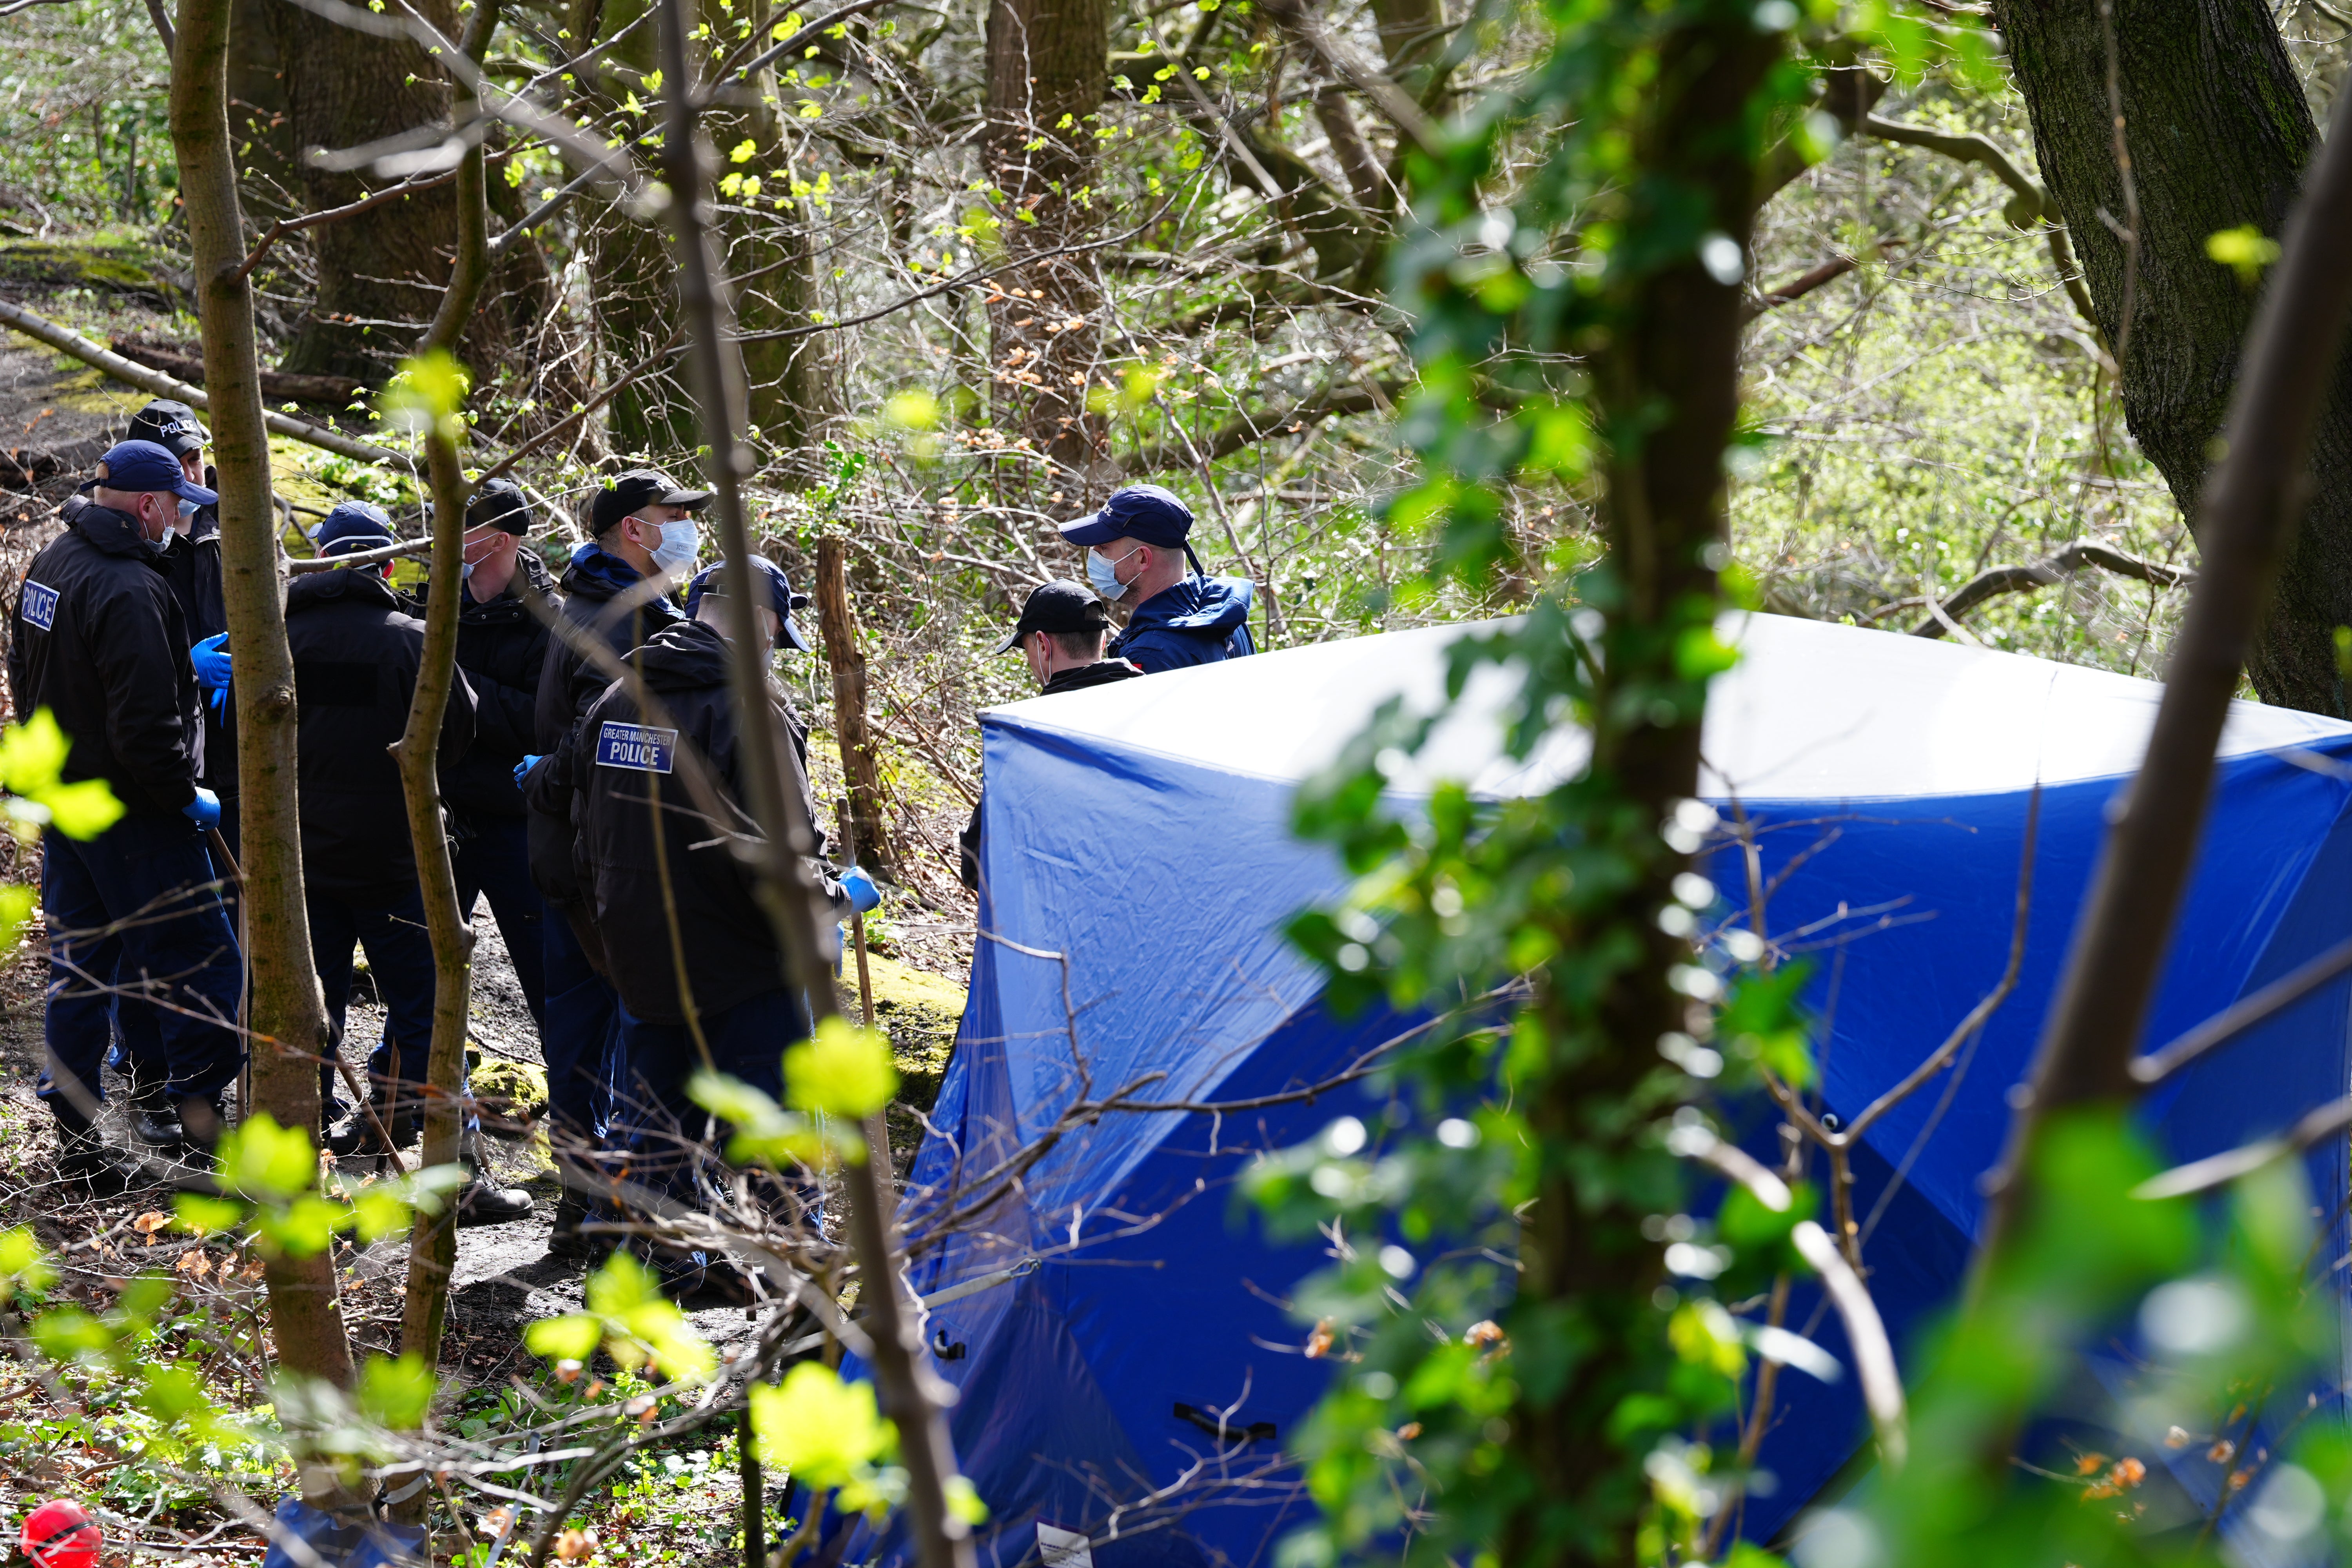 Police officers are searching for other human body parts